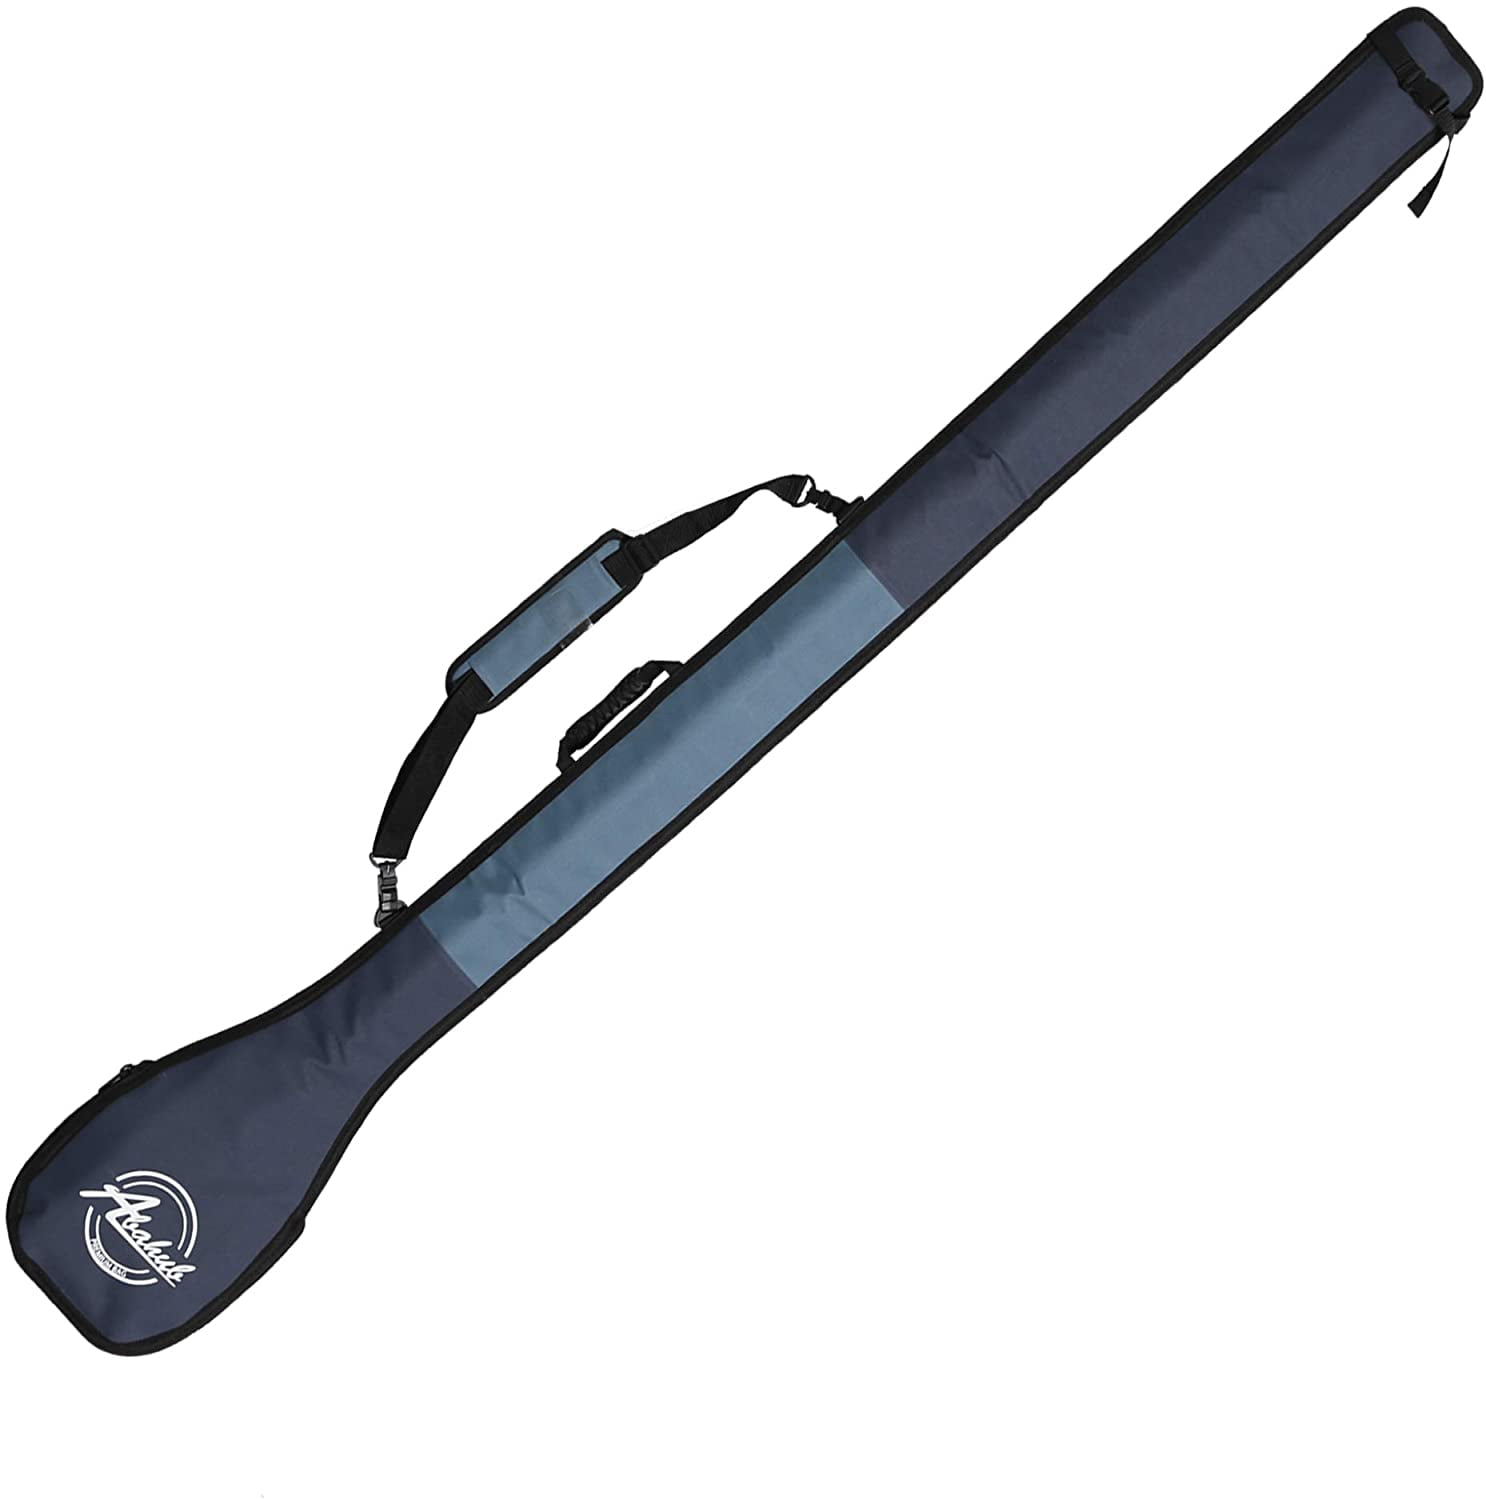 Padded Paddle Bag for Fixed Length Paddles 